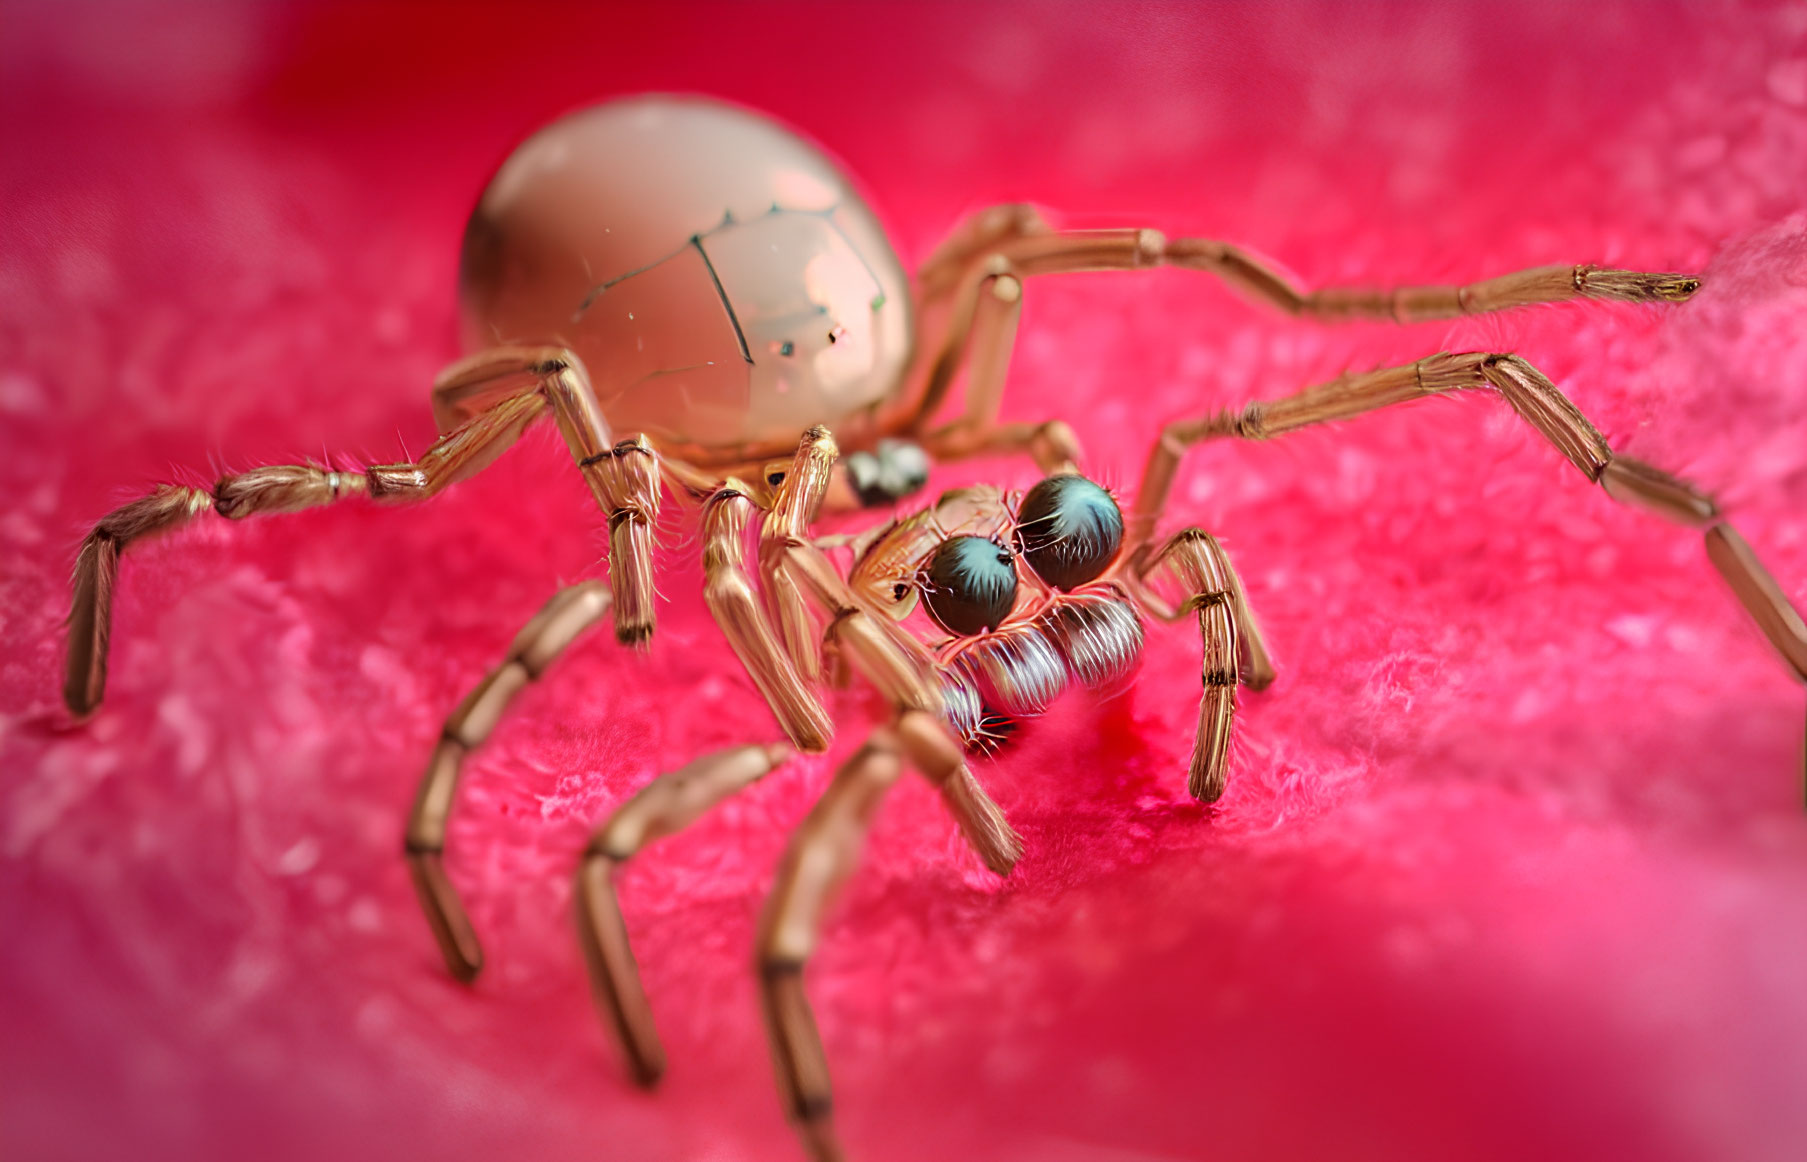 Macro Spider on Textured Red Surface: Reflective Abdomen & Detailed Eyes